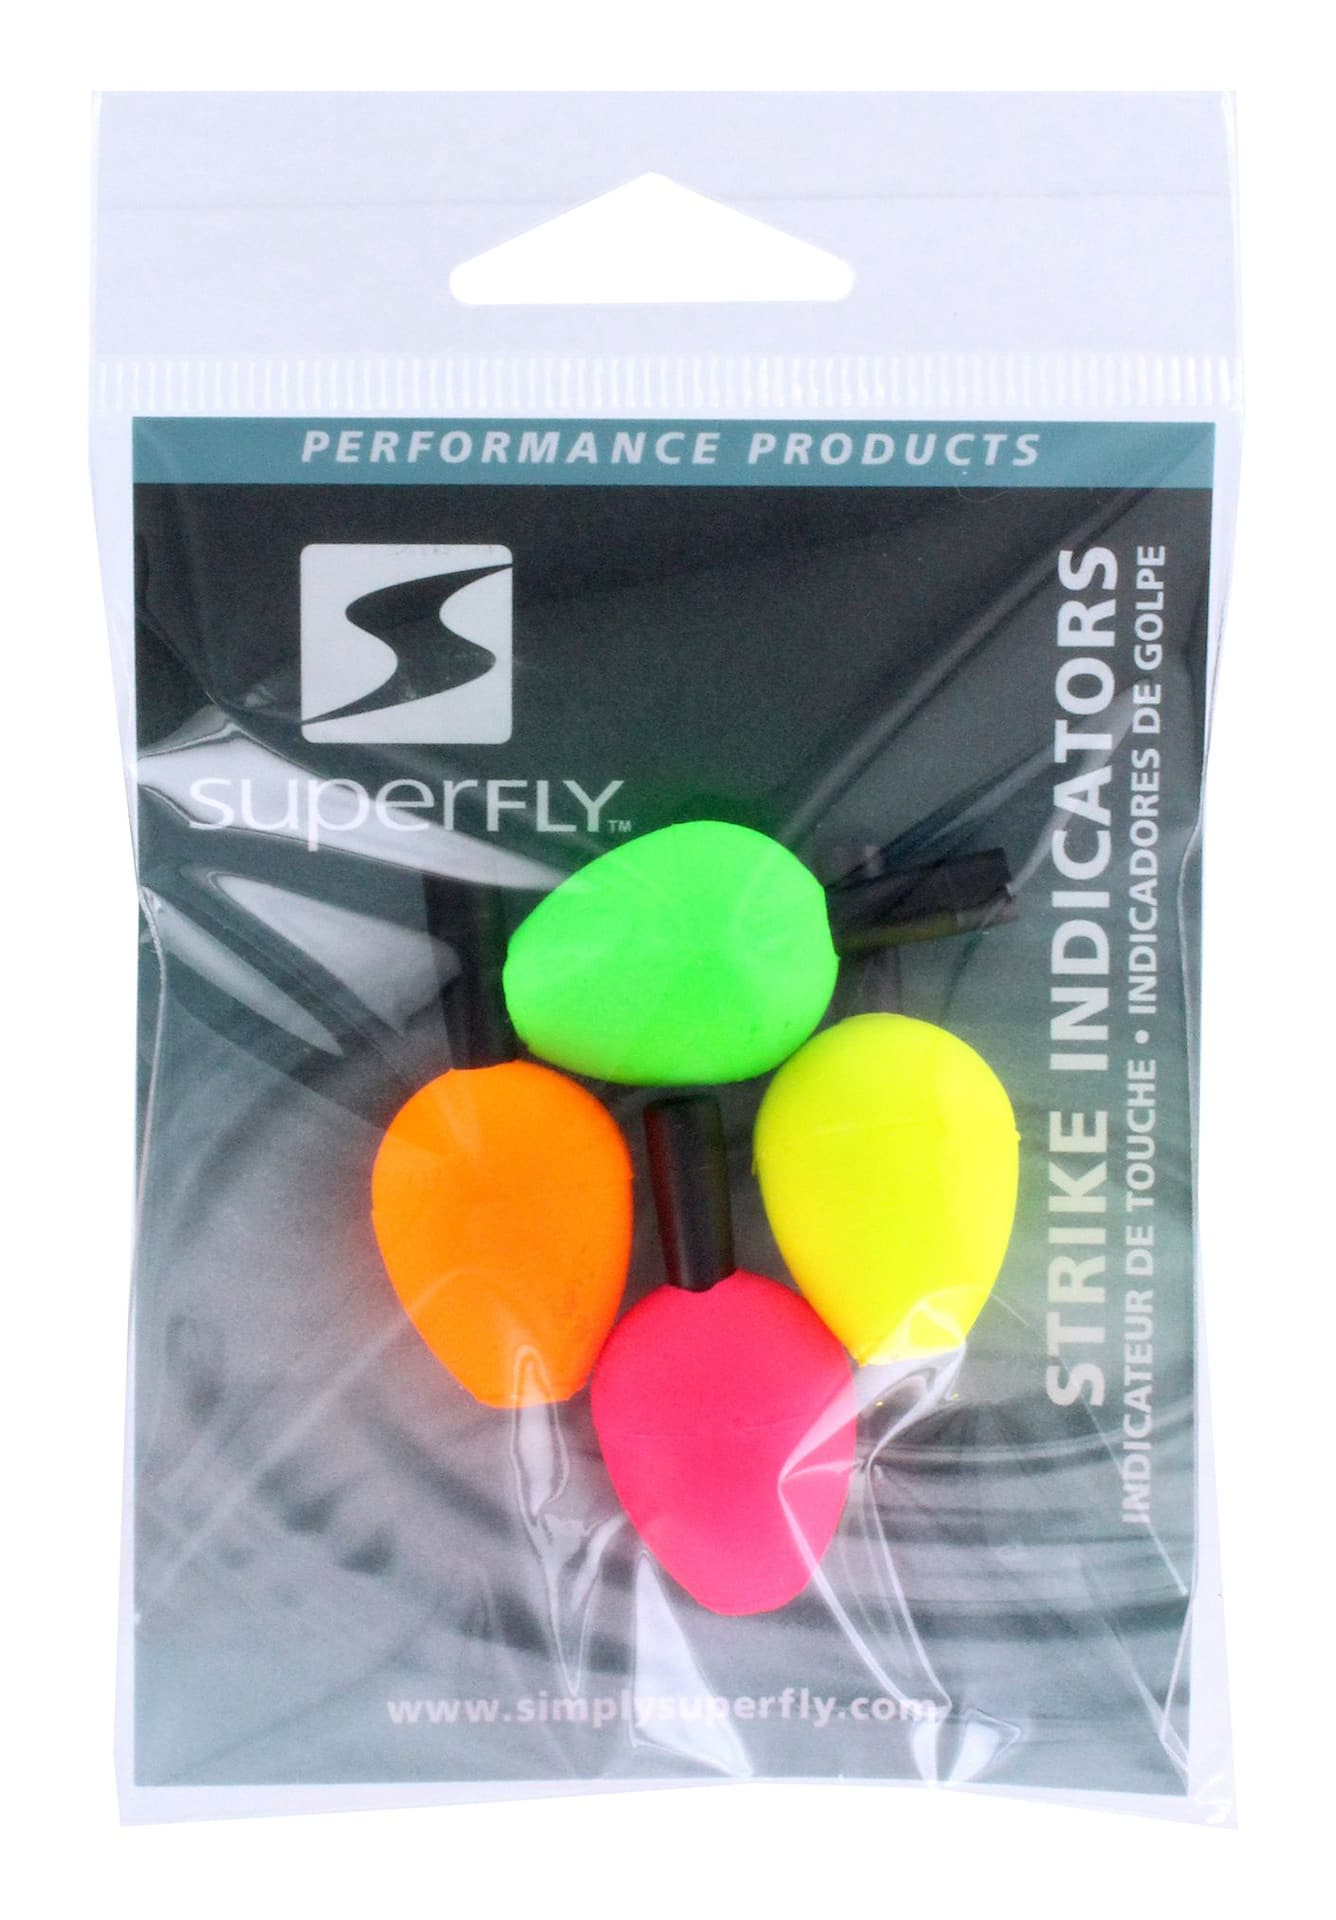 https://media-www.canadiantire.ca/product/playing/fishing/fishing-equipment/1784013/superfly-quick-release-strike-indicators-pear-assorted-36f902f5-9f72-4868-880f-33ebe66b7d4a-jpgrendition.jpg